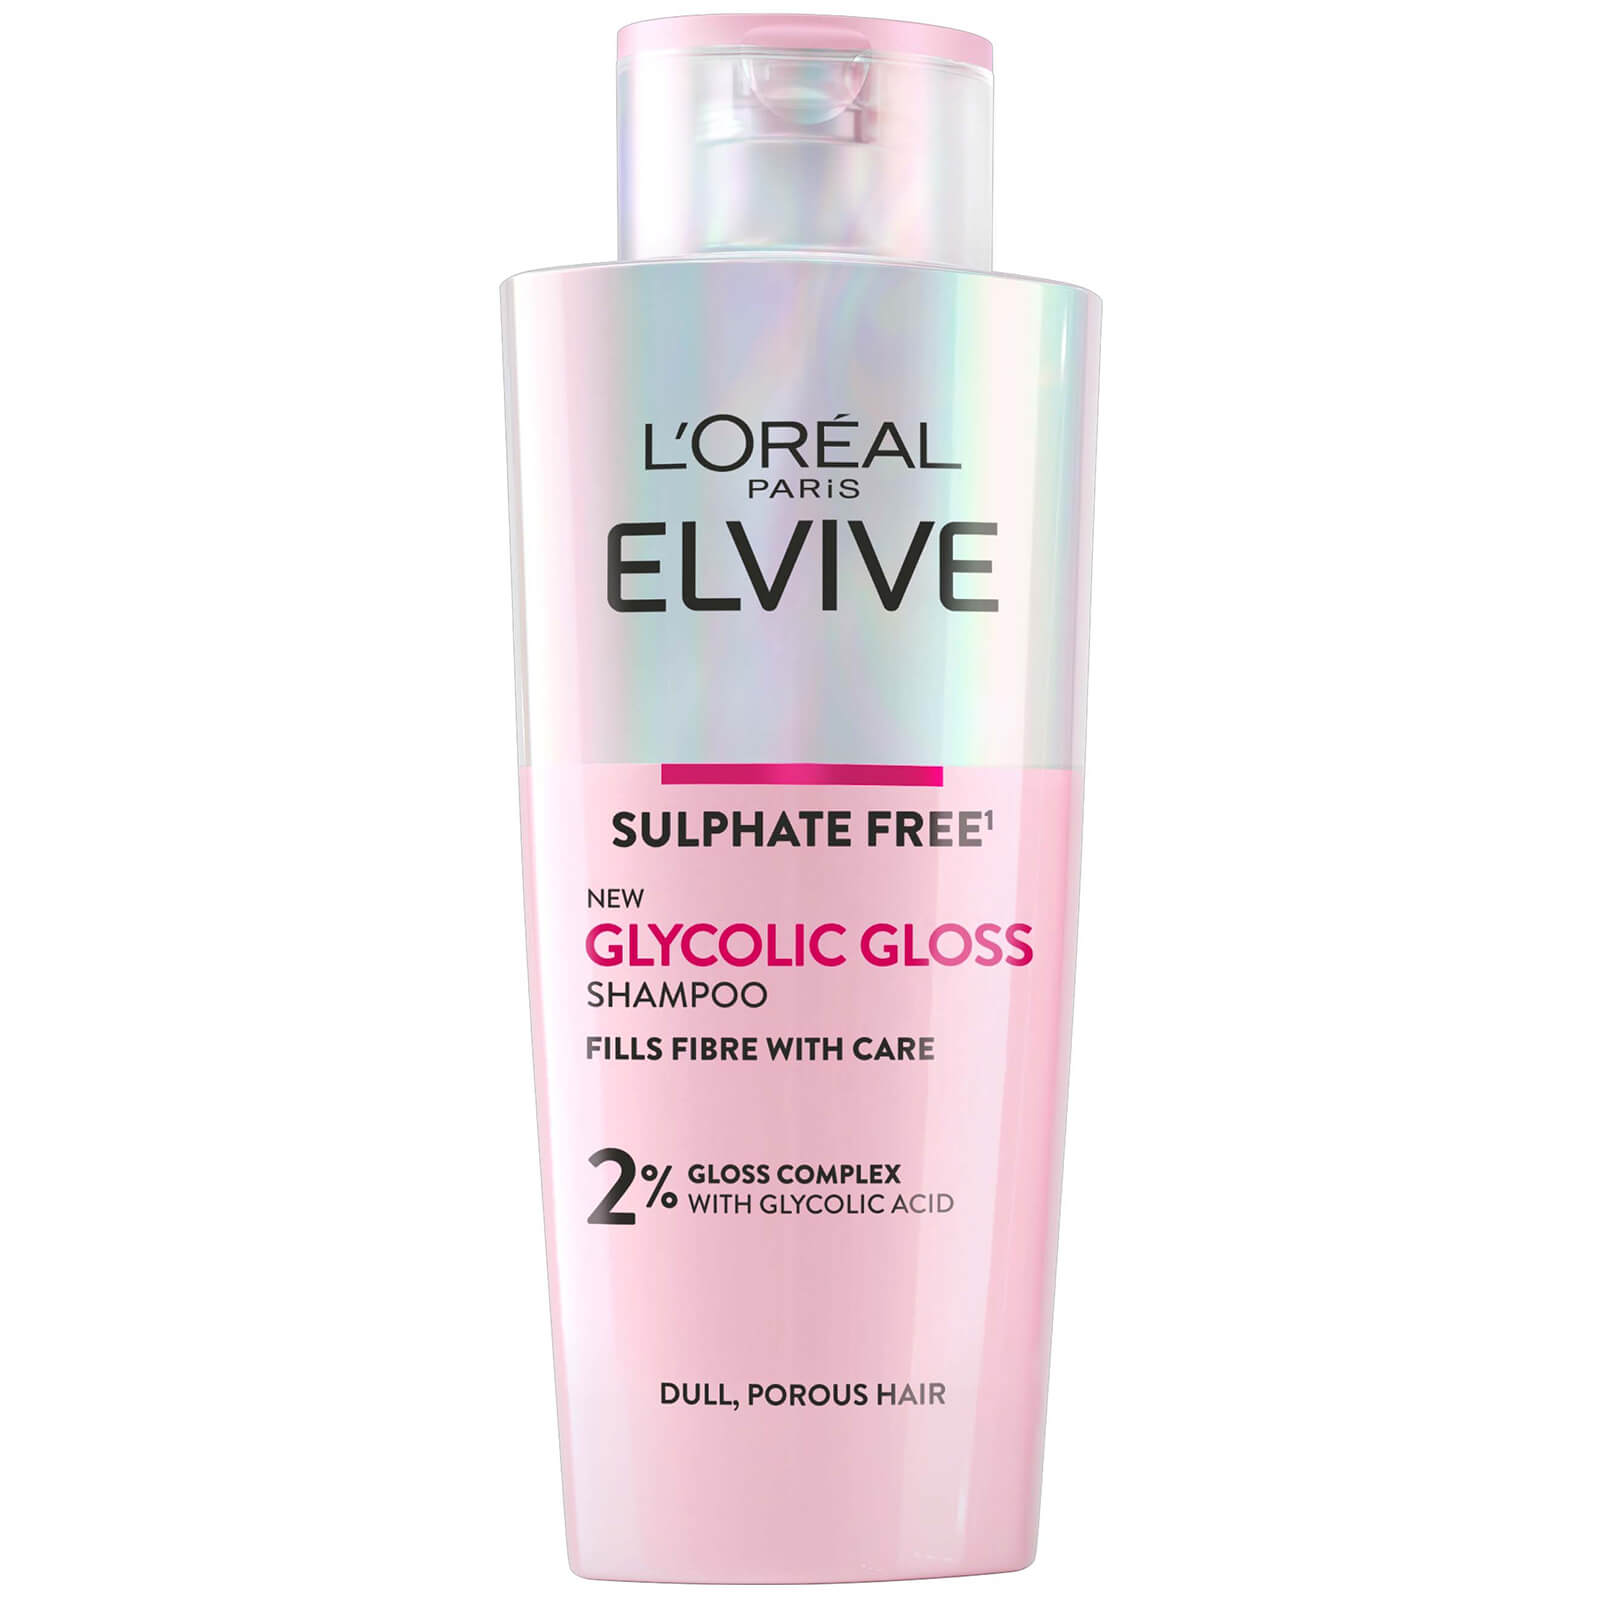 L'oréal Paris Elvive Glycolic Gloss Sulphate Free Shampoo For Dull Hair 200ml In White